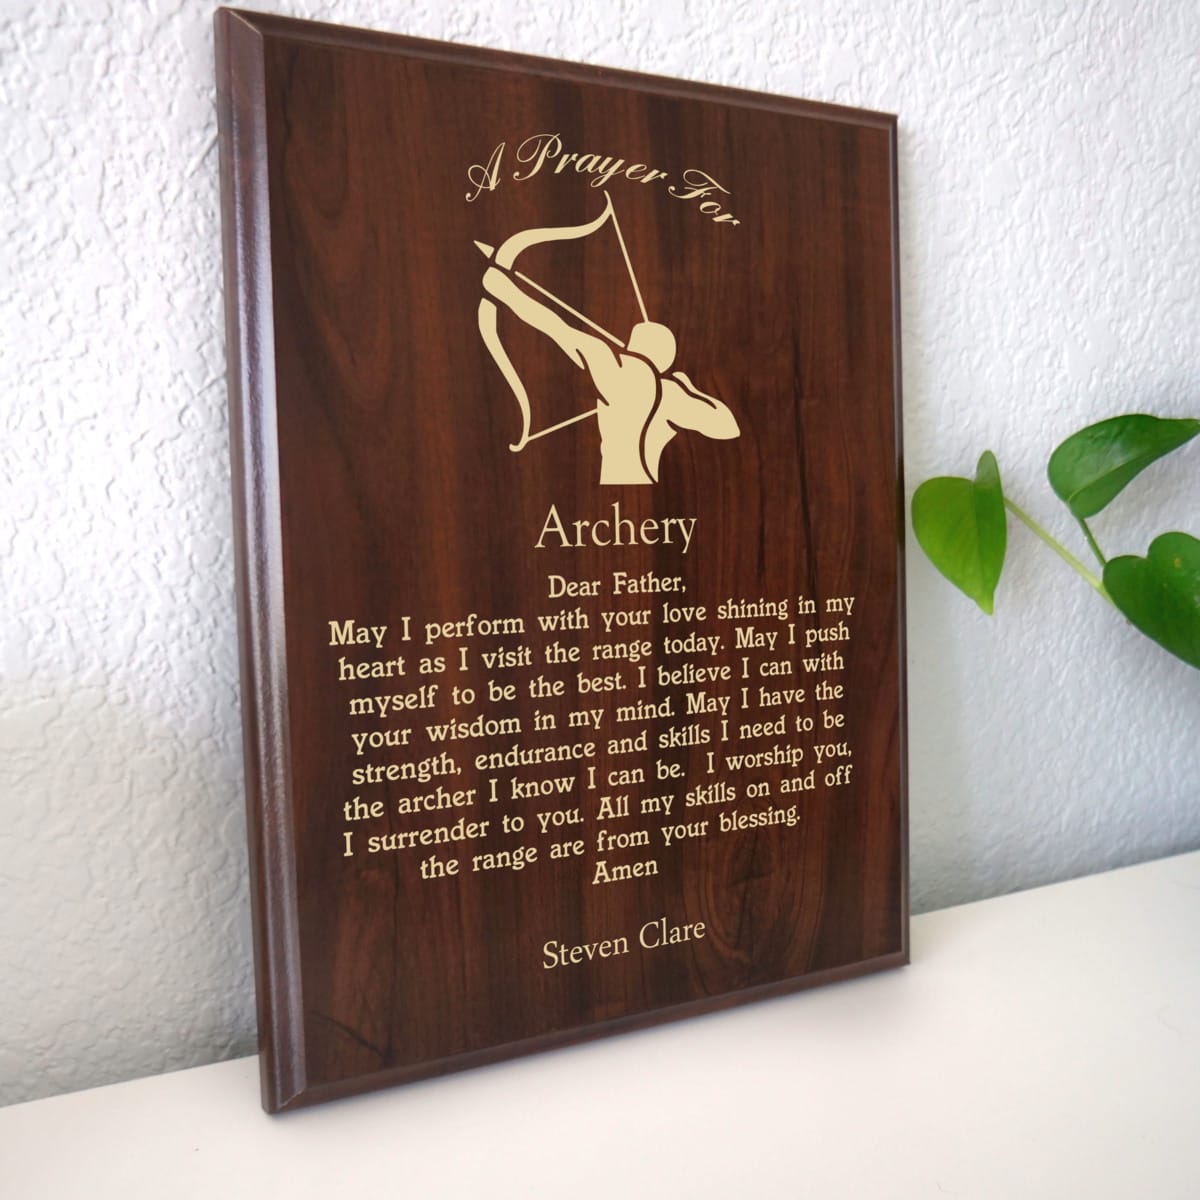 Photo of plaque resting on table at an angle.